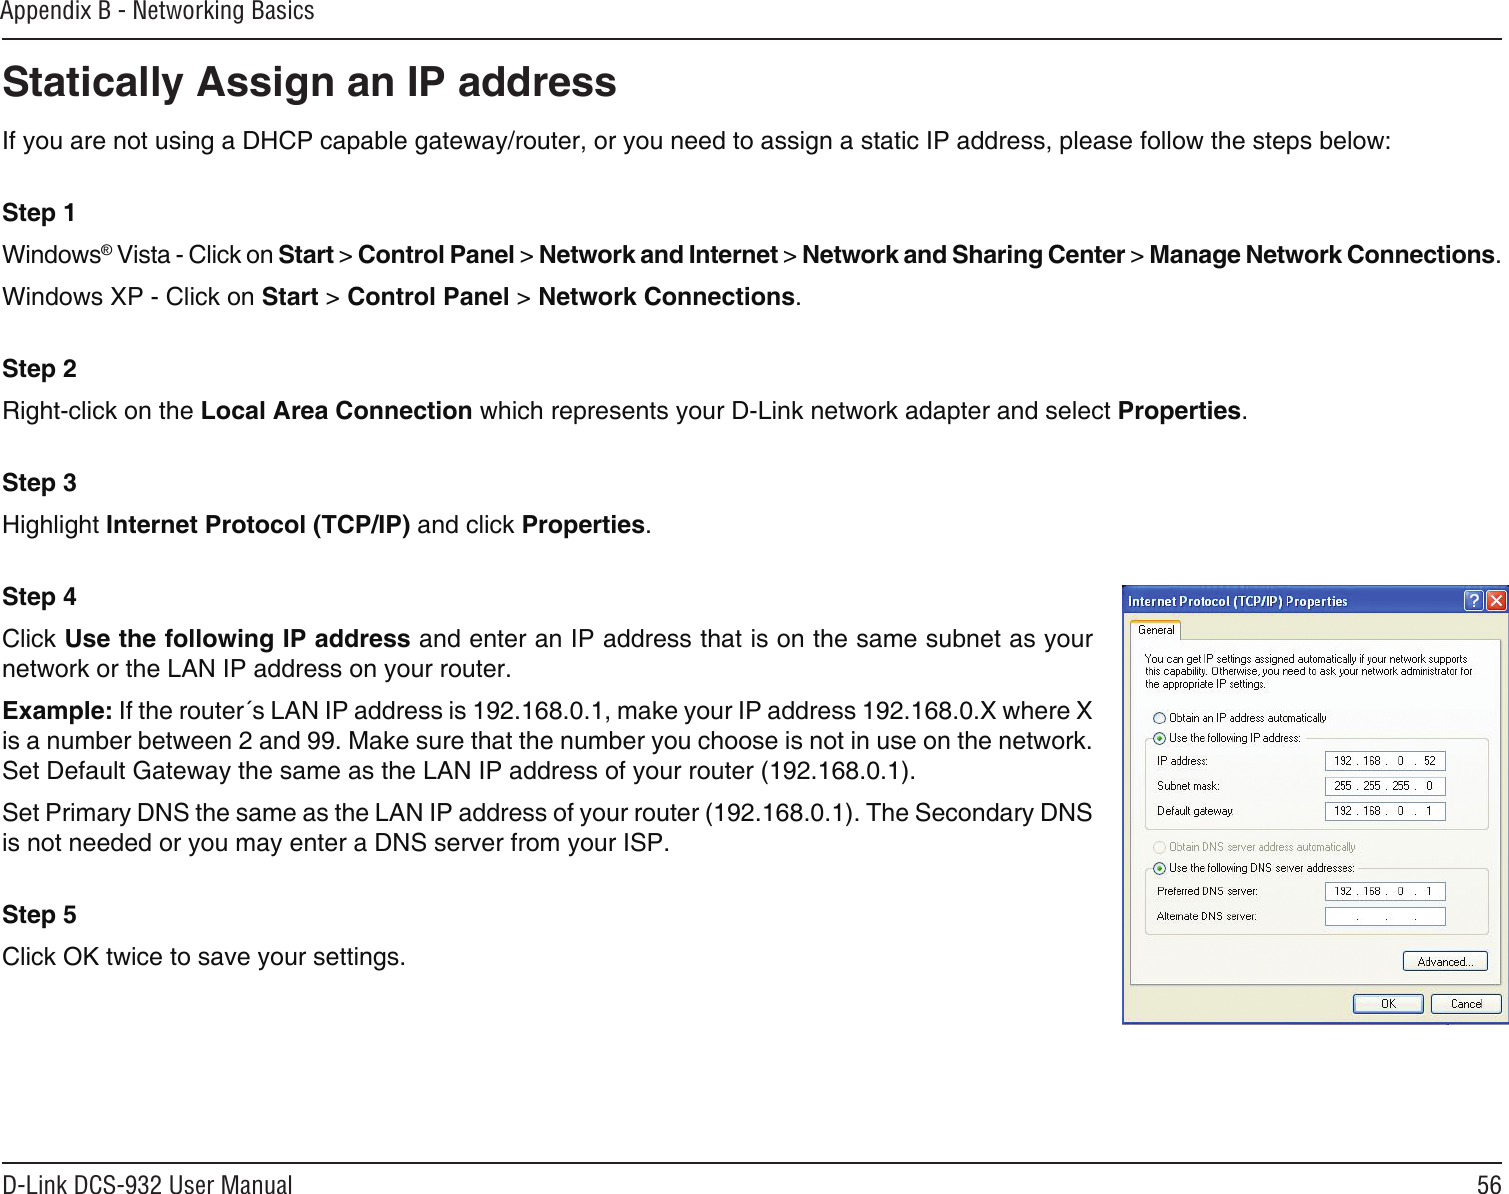 56D-Link DCS-932 User ManualAppendix B - Networking BasicsStatically Assign an IP addressIf you are not using a DHCP capable gateway/router, or you need to assign a static IP address, please follow the steps below: Step 1Windows® Vista - Click on Start &gt; Control Panel &gt; Network and Internet &gt; Network and Sharing Center &gt; Manage Network Connections. Windows XP - Click on Start &gt; Control Panel &gt; Network Connections. Step 2Right-click on the Local Area Connection which represents your D-Link network adapter and select Properties. Step 3Highlight Internet Protocol (TCP/IP) and click Properties. Step 4Click Use the following IP address and enter an IP address that is on the same subnet as your network or the LAN IP address on your router. Example: If the router´s LAN IP address is 192.168.0.1, make your IP address 192.168.0.X where X is a number between 2 and 99. Make sure that the number you choose is not in use on the network. Set Default Gateway the same as the LAN IP address of your router (192.168.0.1). Set Primary DNS the same as the LAN IP address of your router (192.168.0.1). The Secondary DNS is not needed or you may enter a DNS server from your ISP. Step 5Click OK twice to save your settings.